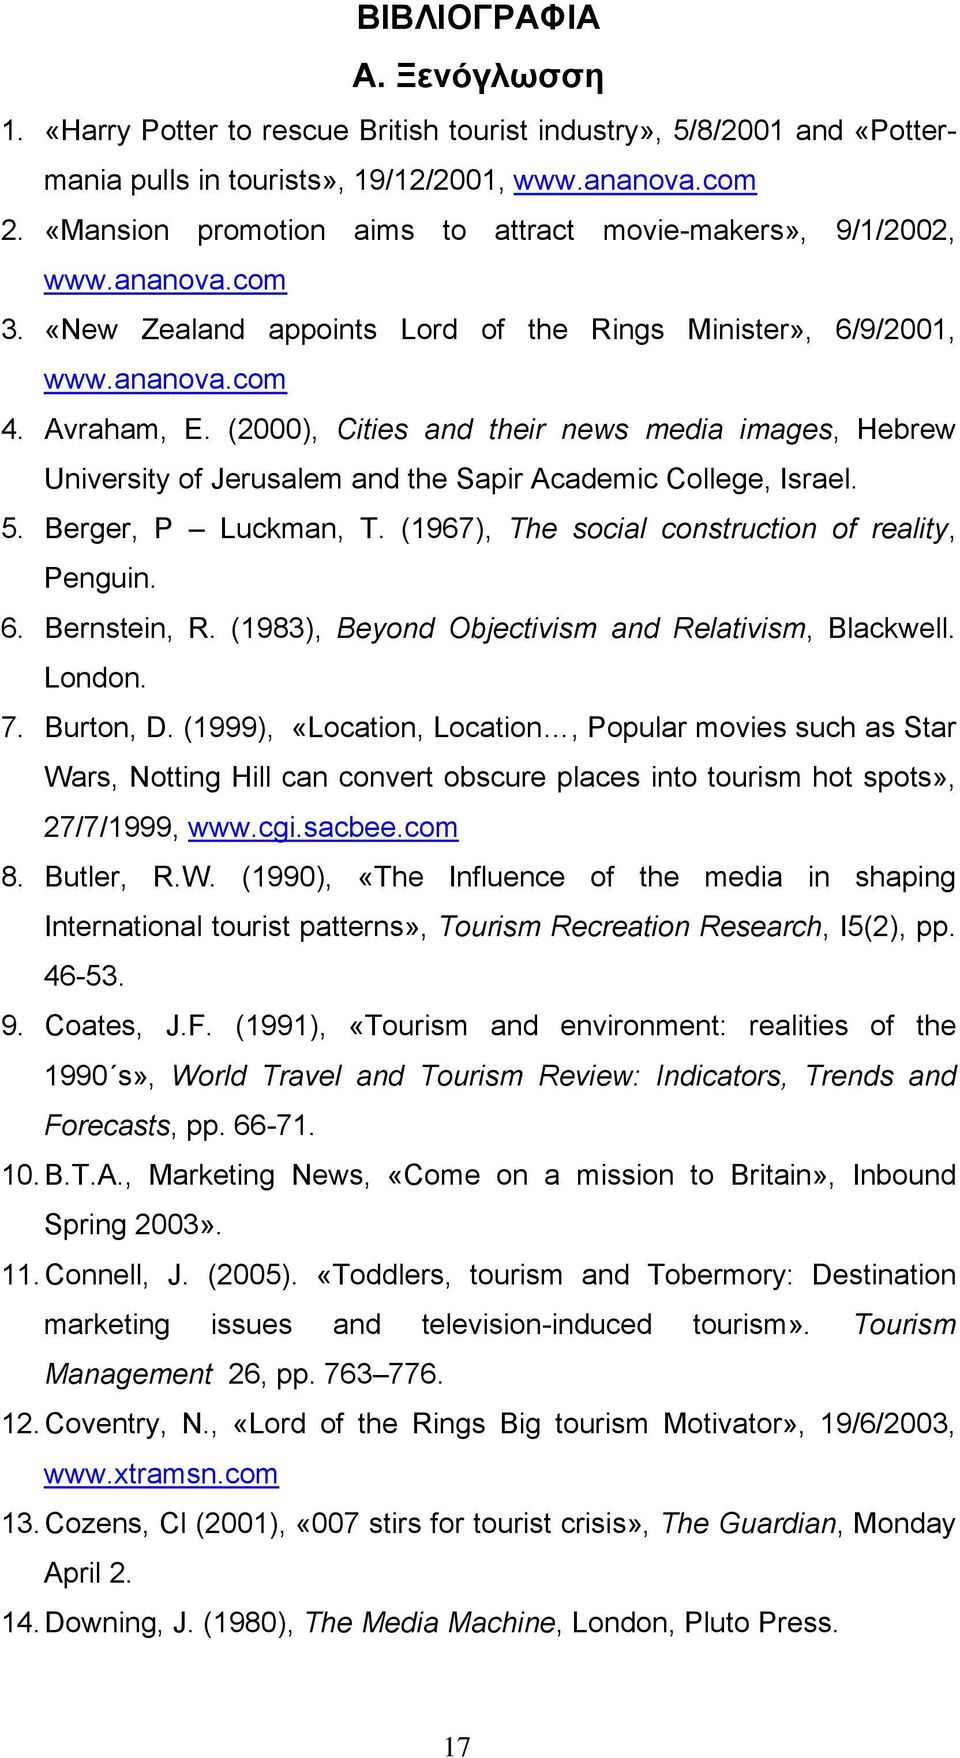 (2000), Cities and their news media images, Hebrew University of Jerusalem and the Sapir Academic College, Israel. 5. Berger, P Luckman, T. (1967), The social construction of reality, Penguin. 6.